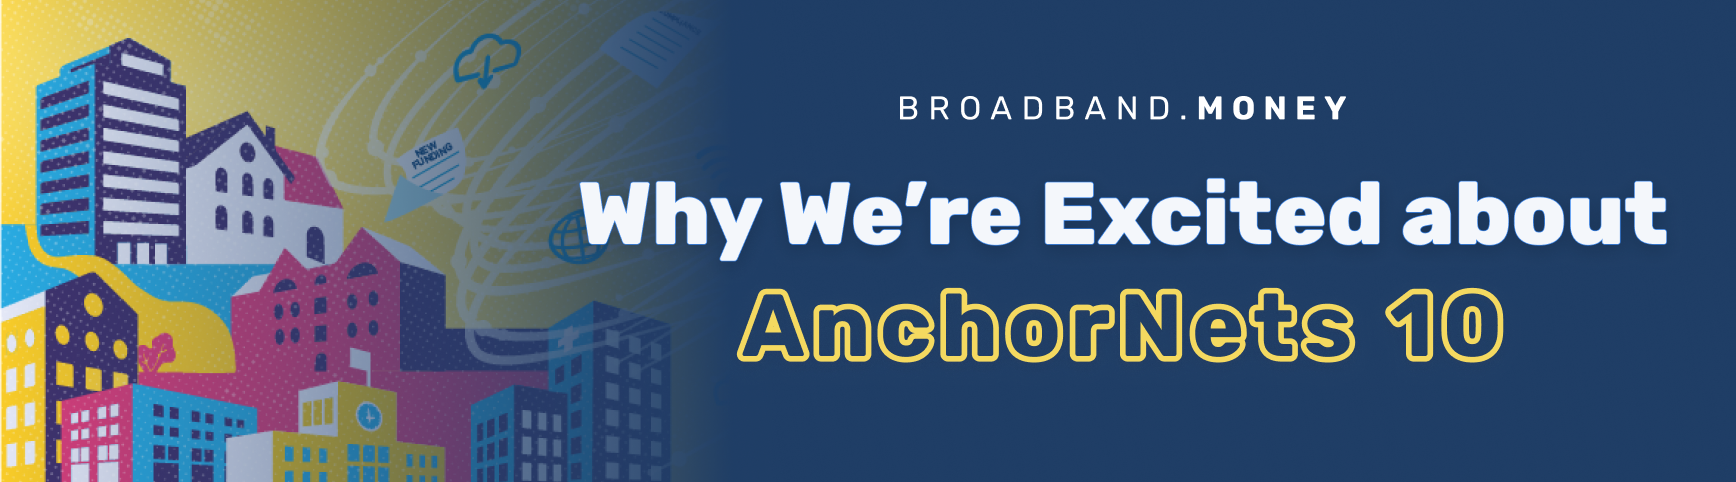 Why we're excited about SHLB Coalition's AnchorNets 10 Thumbnail Image